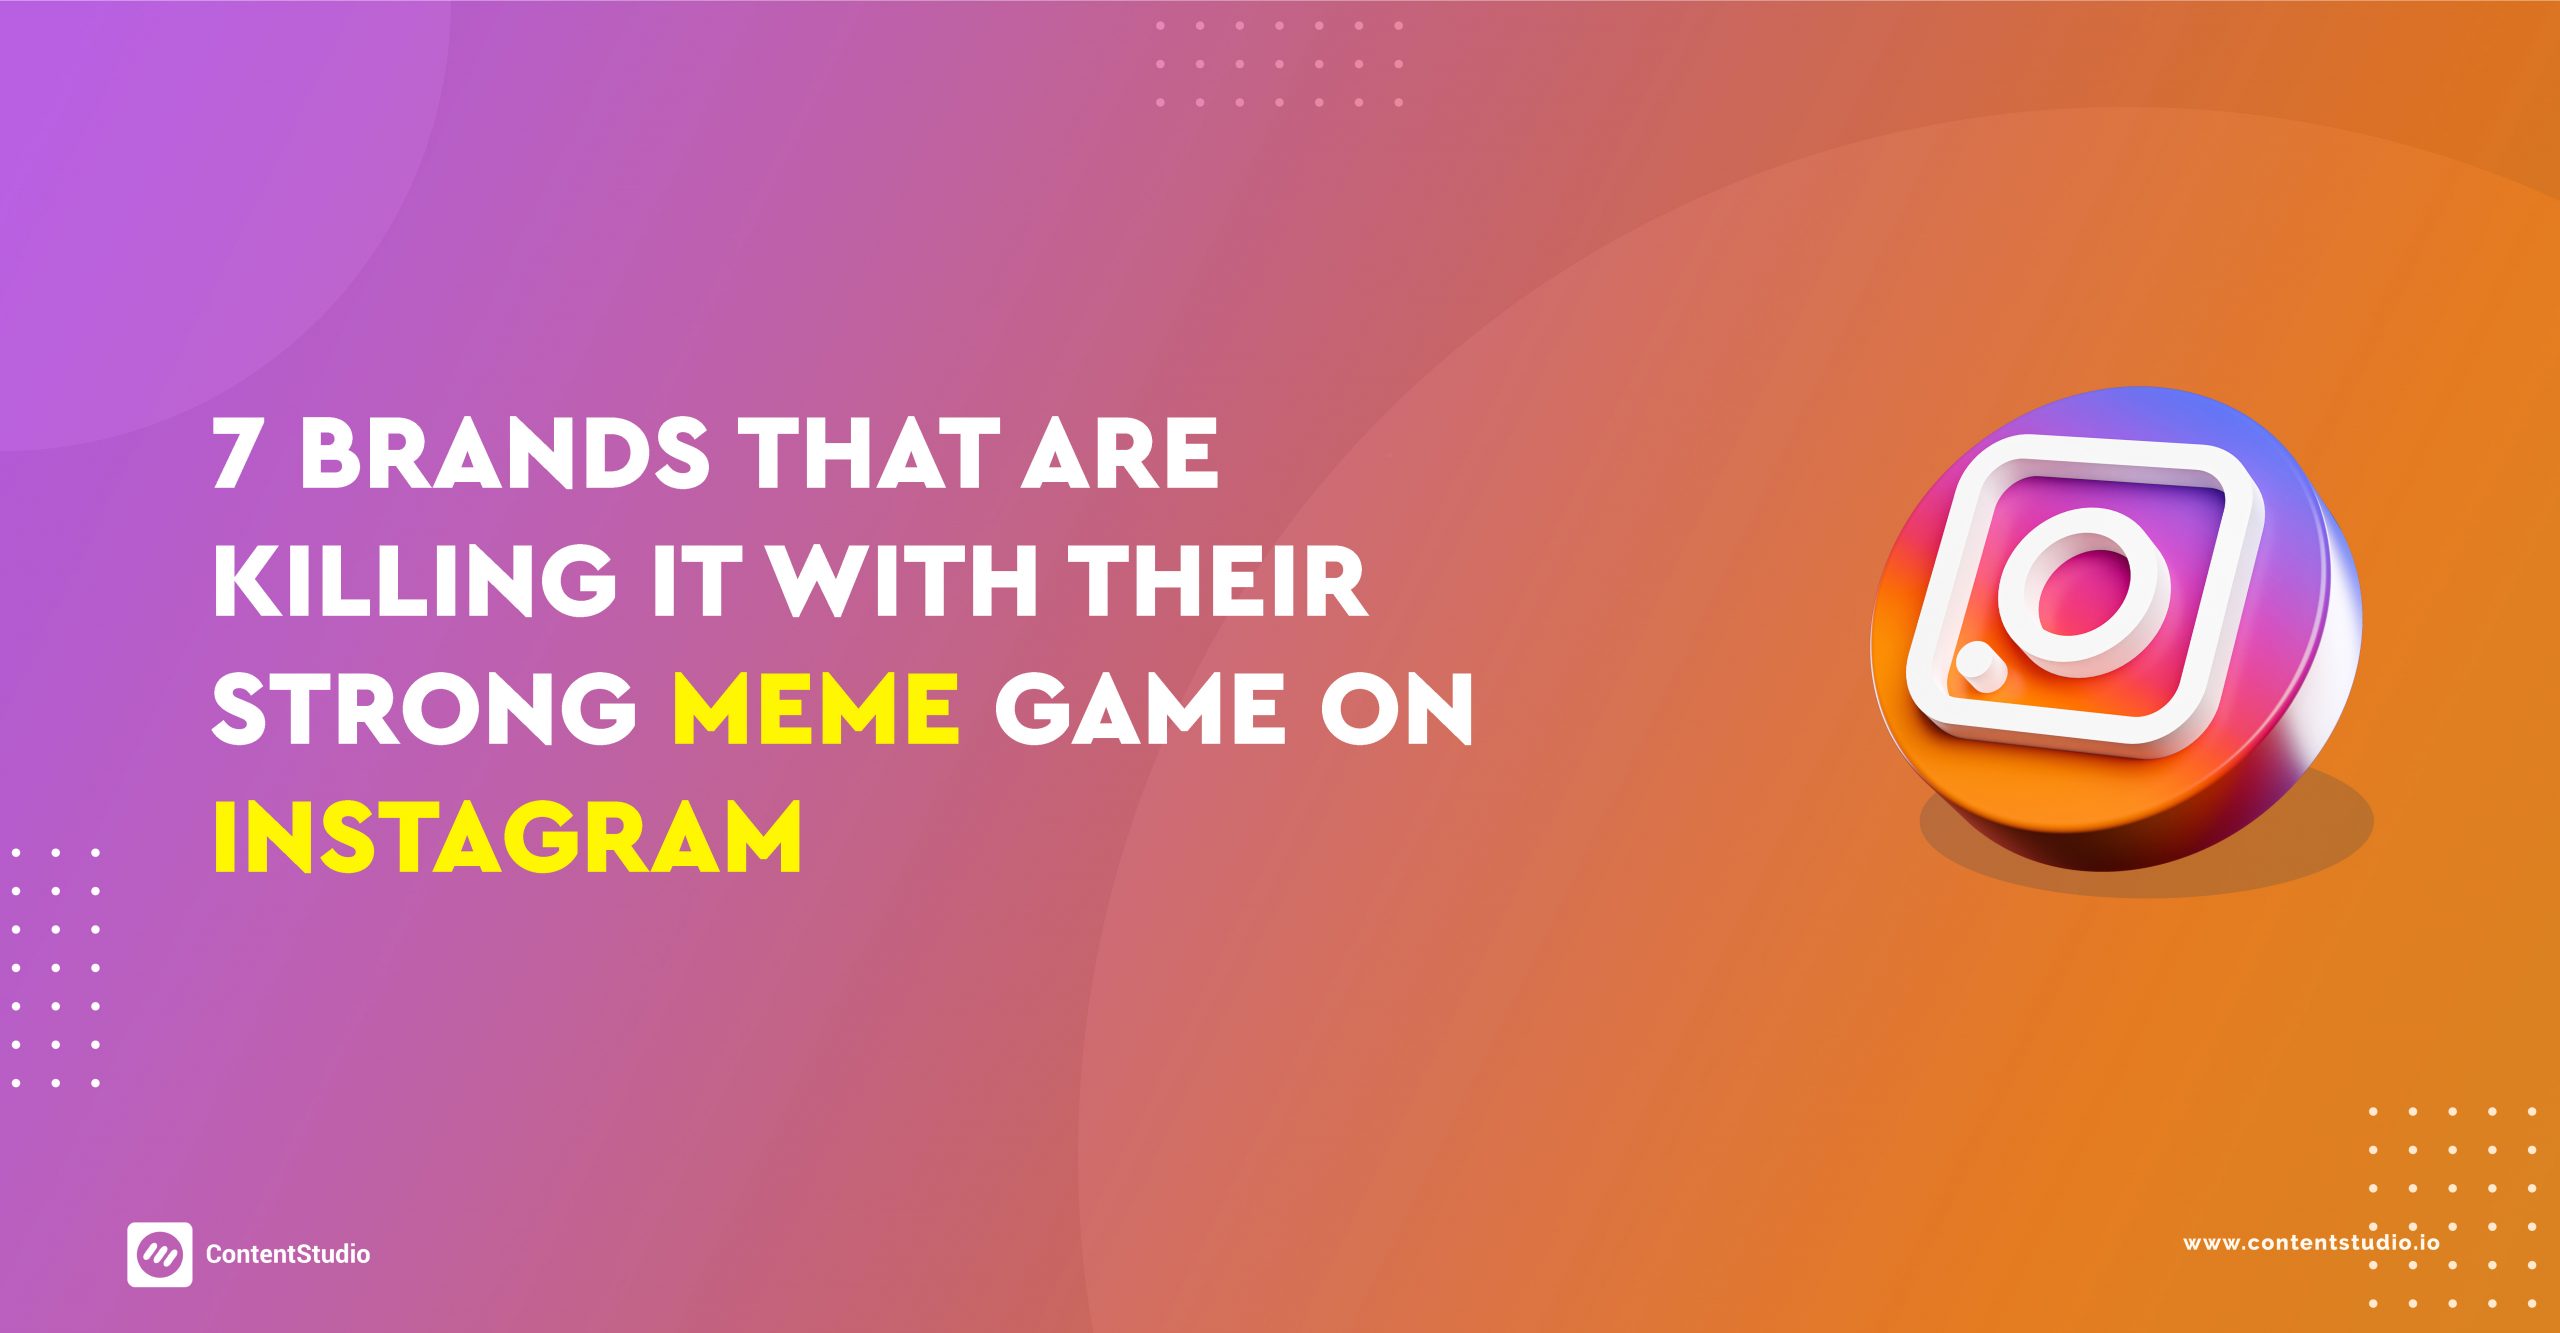 7 Brands that are Killing It with Their Strong Meme Game on Instagram